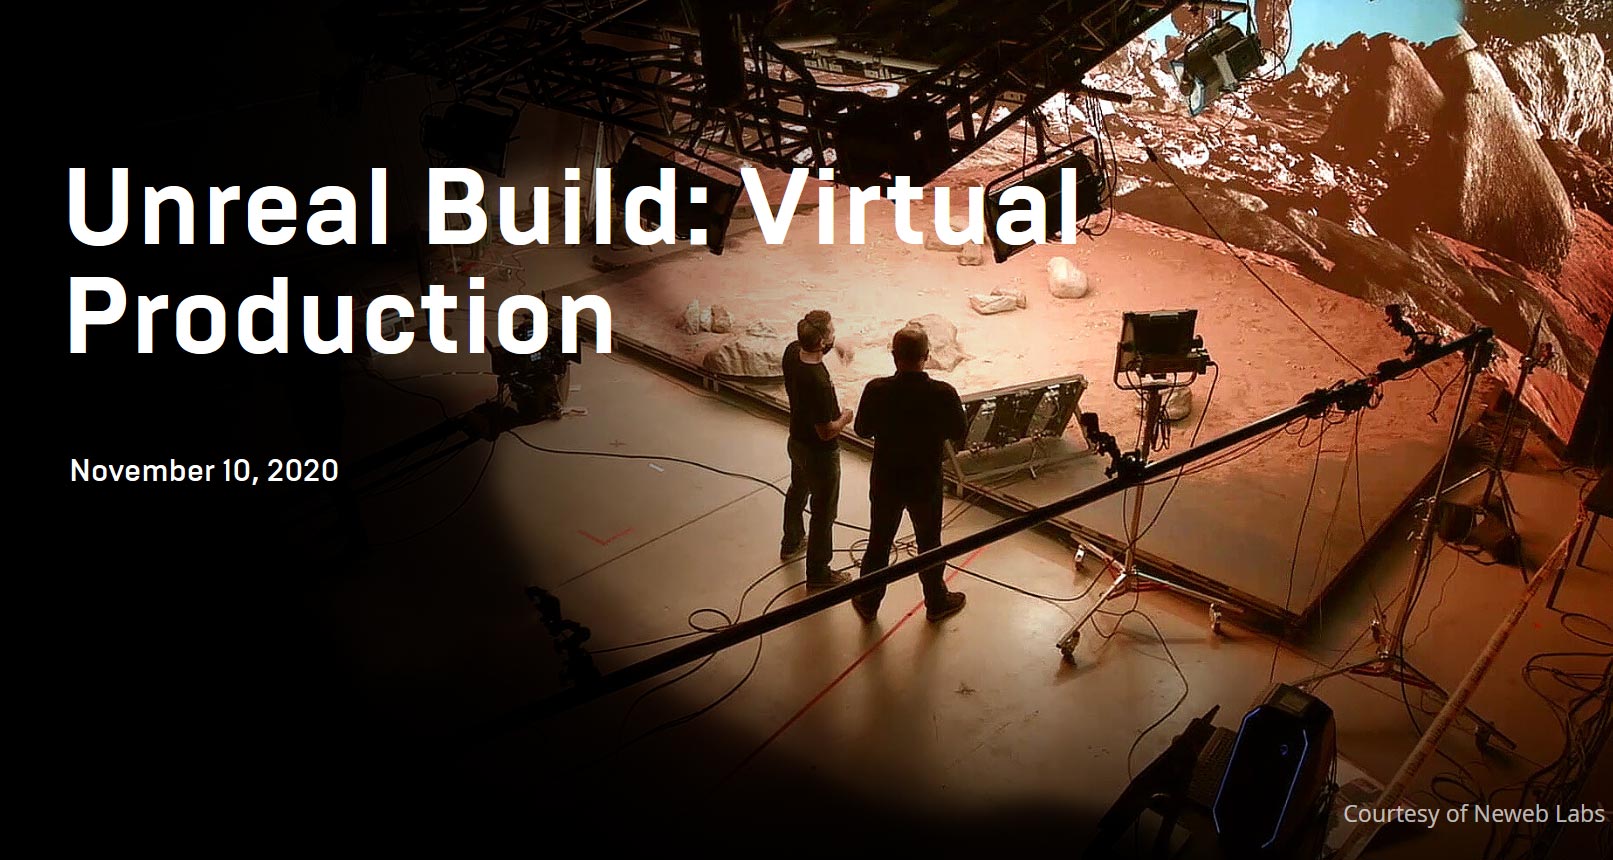 Unreal Build: Virtual Production, a free online event